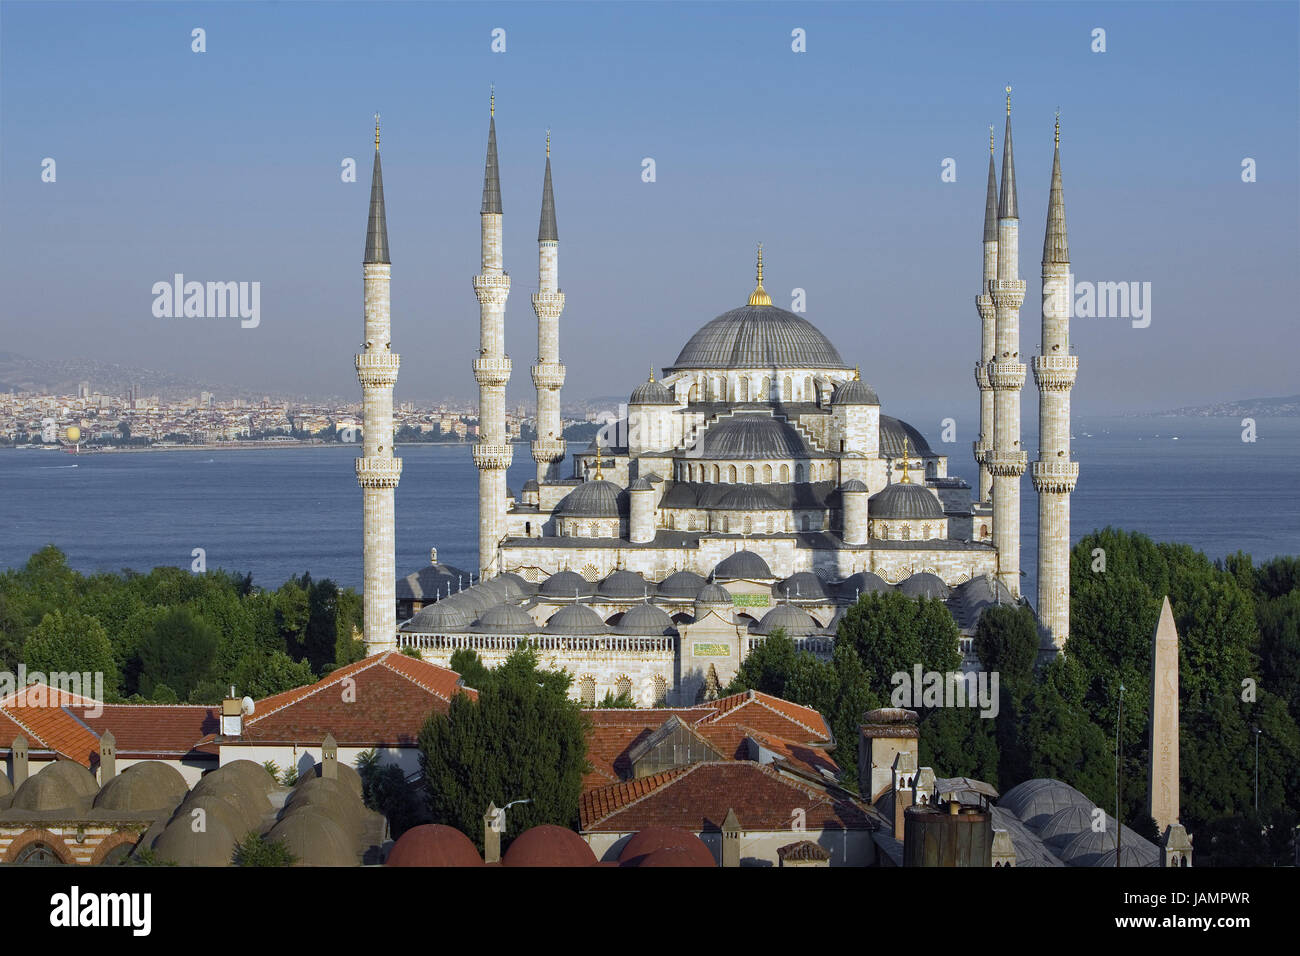 Turkey,Istanbul,sultan Ahmet Camii,'blue mosque',roofs,background,sea,town,city,metropolis,port,culture,faith,religion,Islam,structure,historically,architecture,church,sacred construction,Sultan-Ahmet-Camii,sultan's Ahmed's mosque,mosque,domed building,towers,landmarks,places of interest,minarets,domes,outside,deserted,the Bosporus, Stock Photo